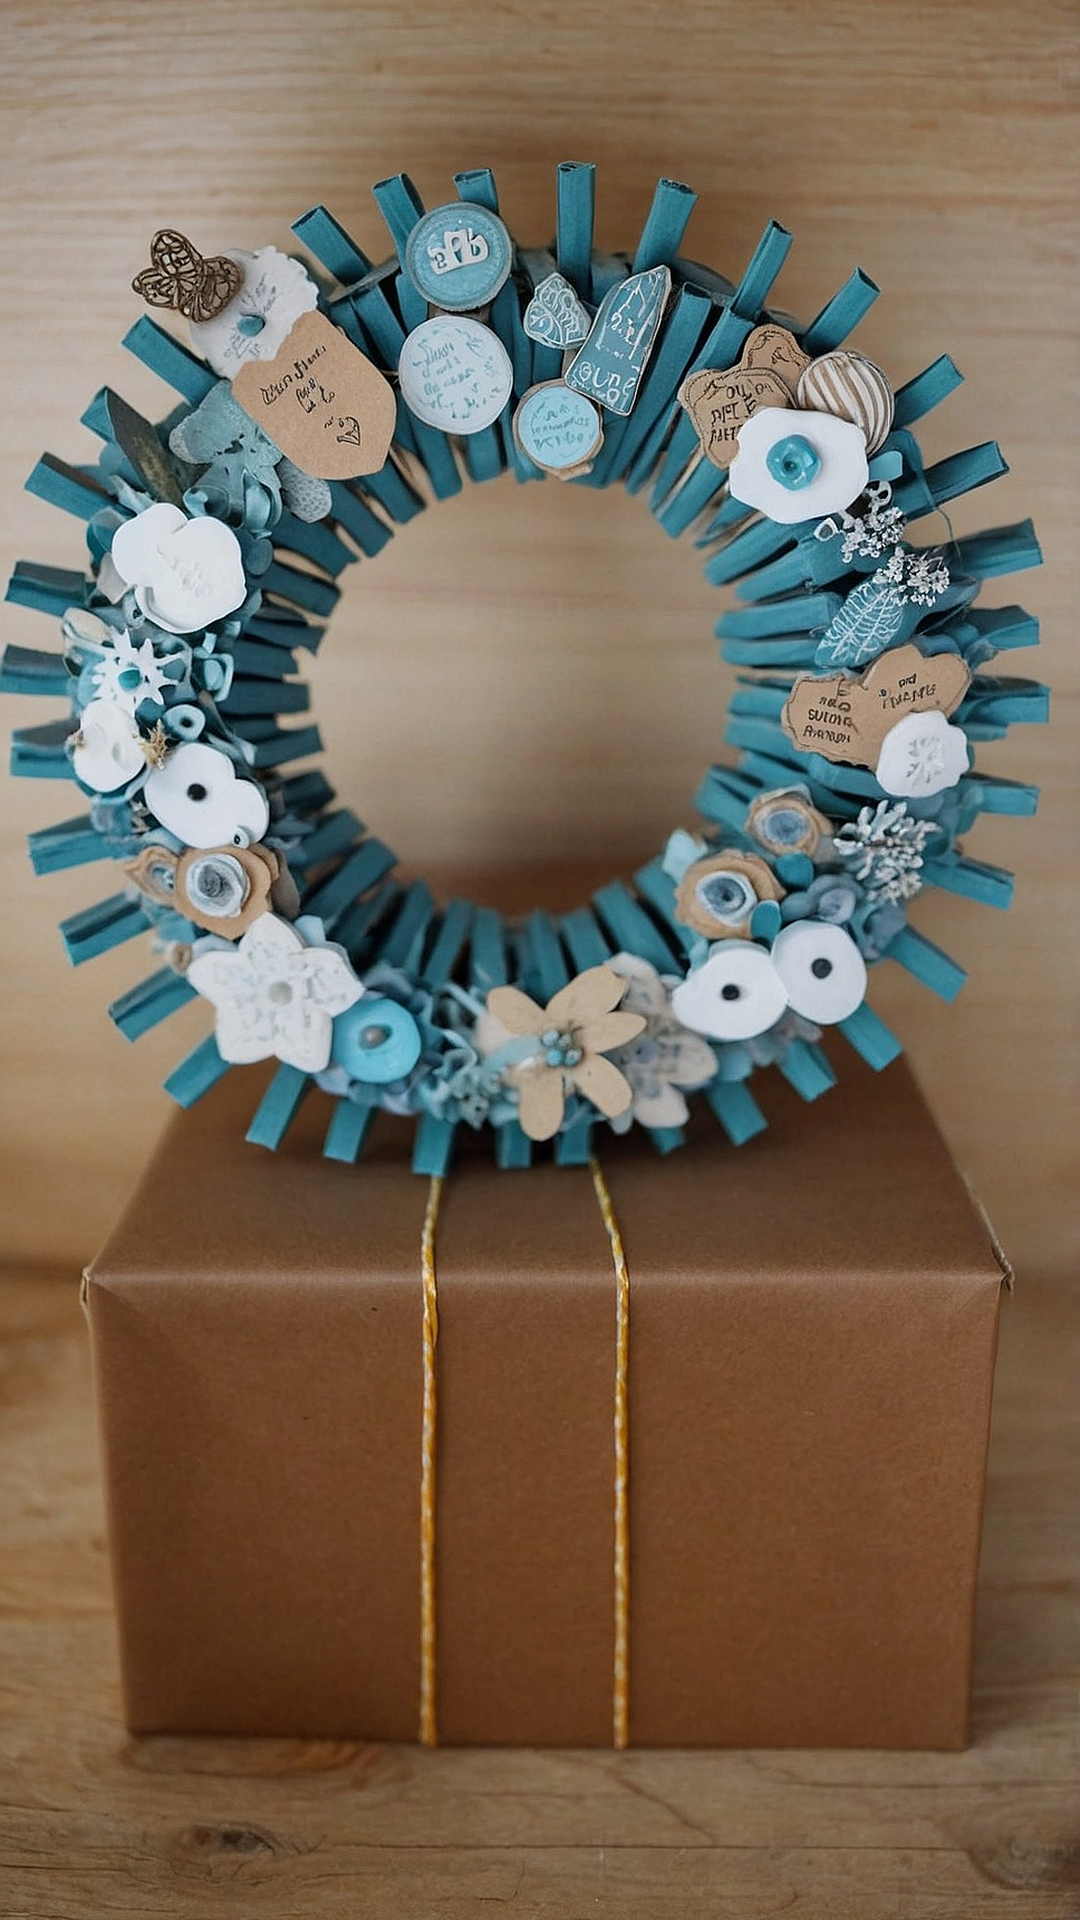 From Me to You: DIY Gift Crafts